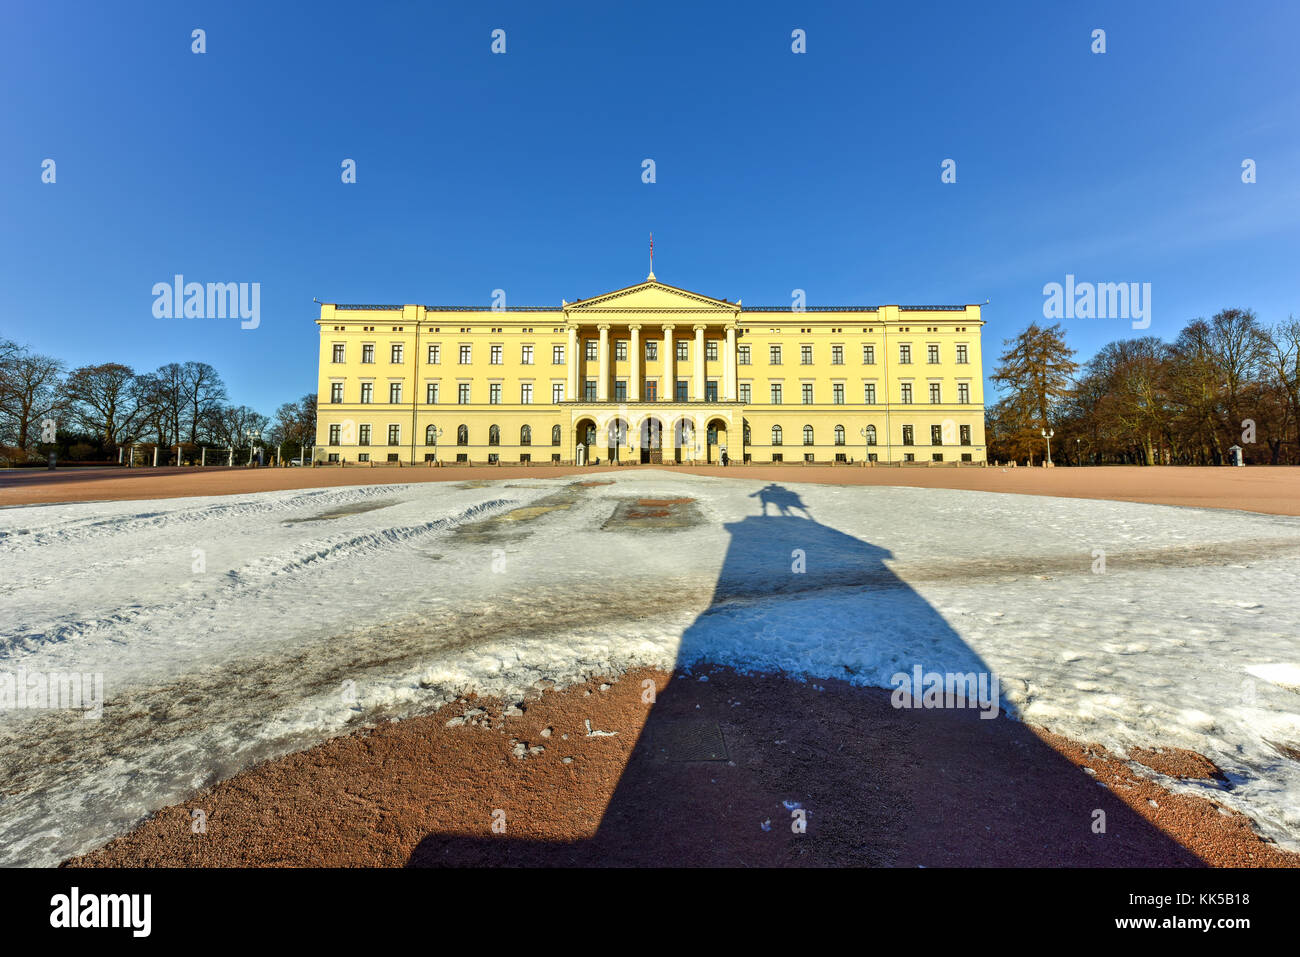 Royal Palace of Oslo. The palace is the official residence of the present Norwegian monarch. Stock Photo